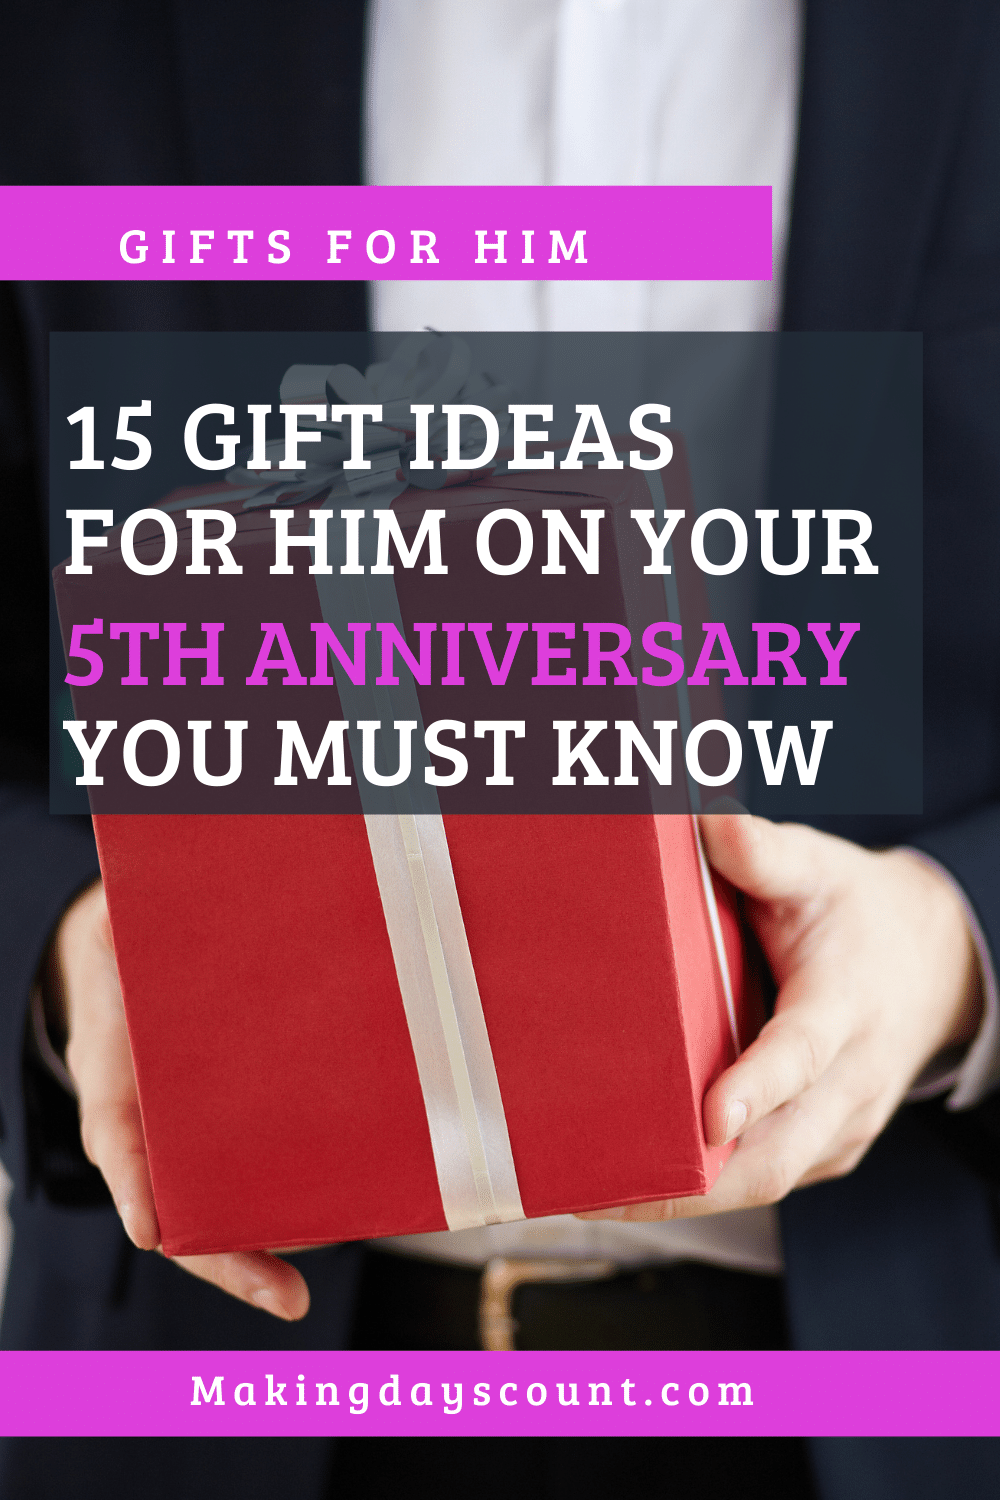 5th anniversary gifts for him